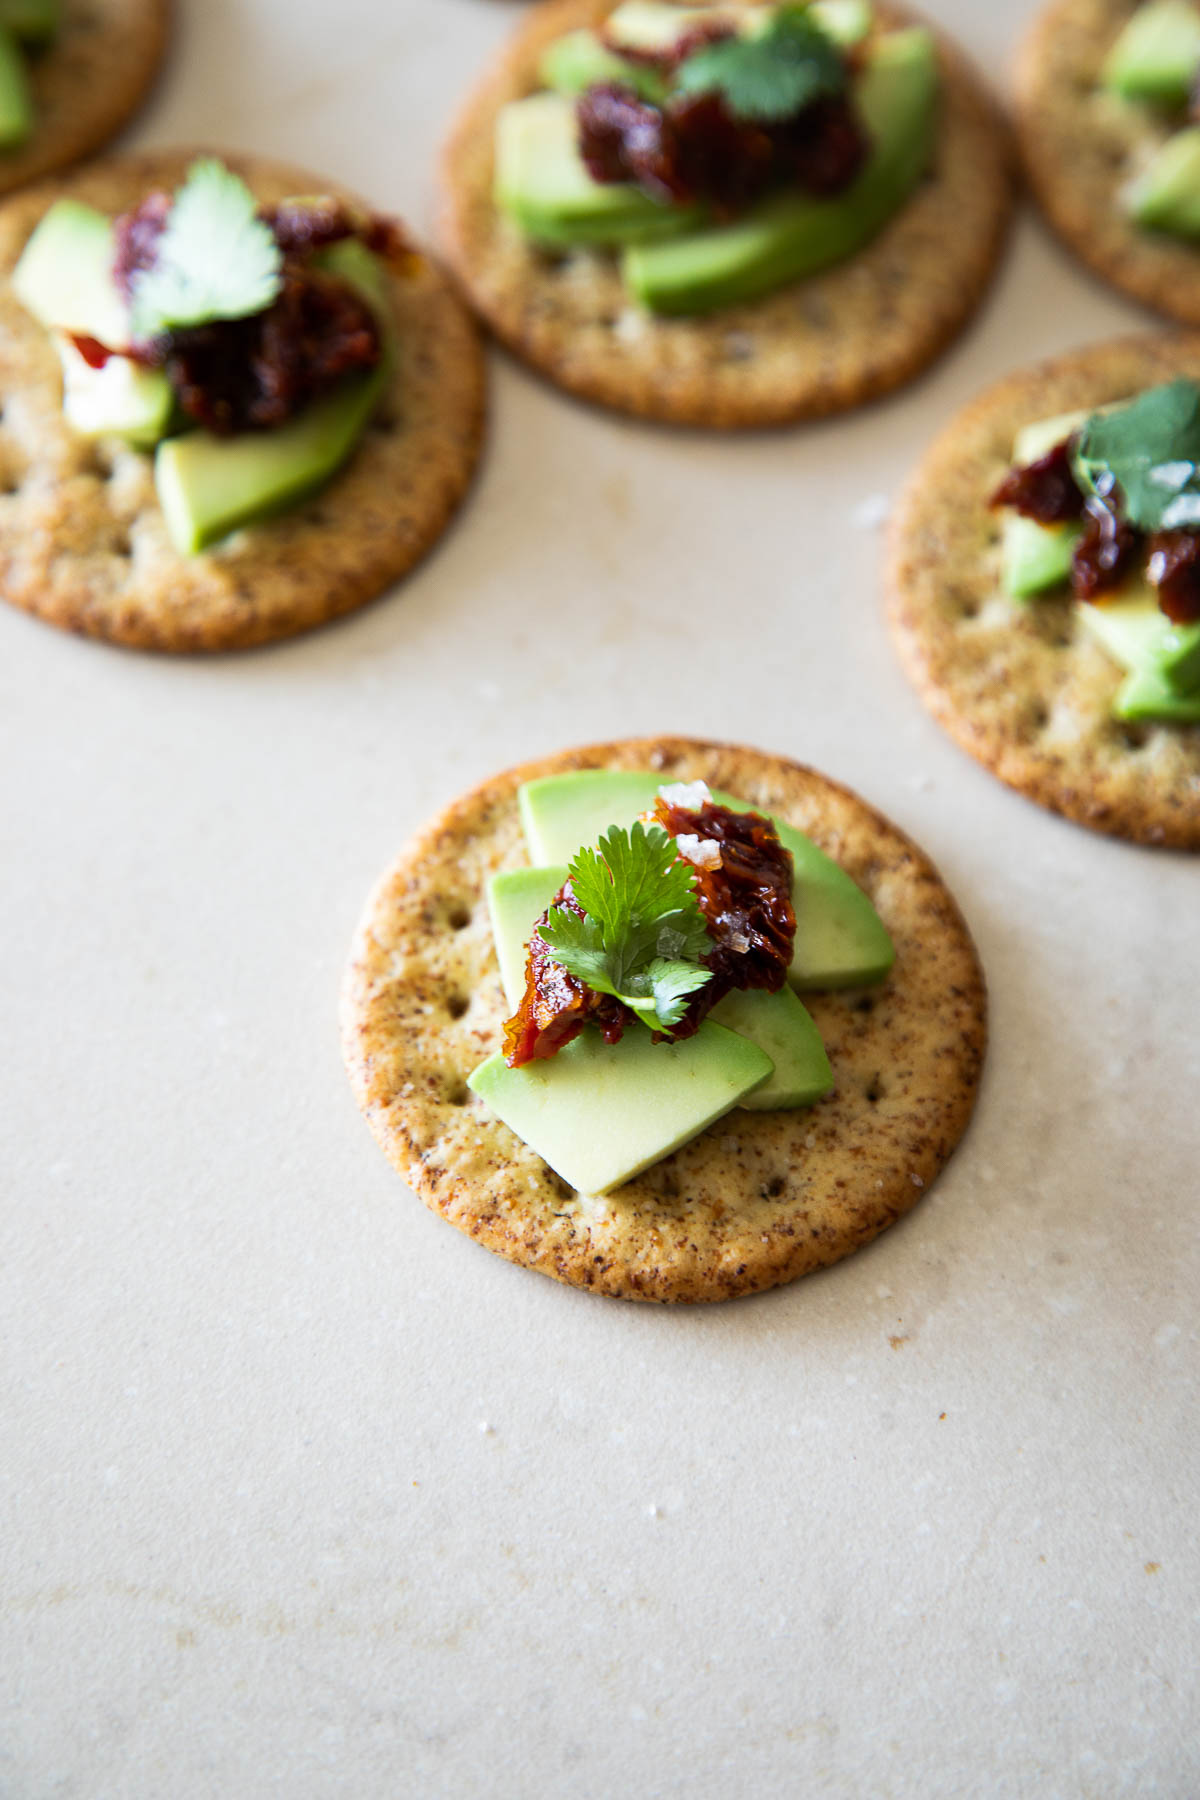 Avocado Crackers with Sun Dried Tomato. One in forefront, more blurred behind.